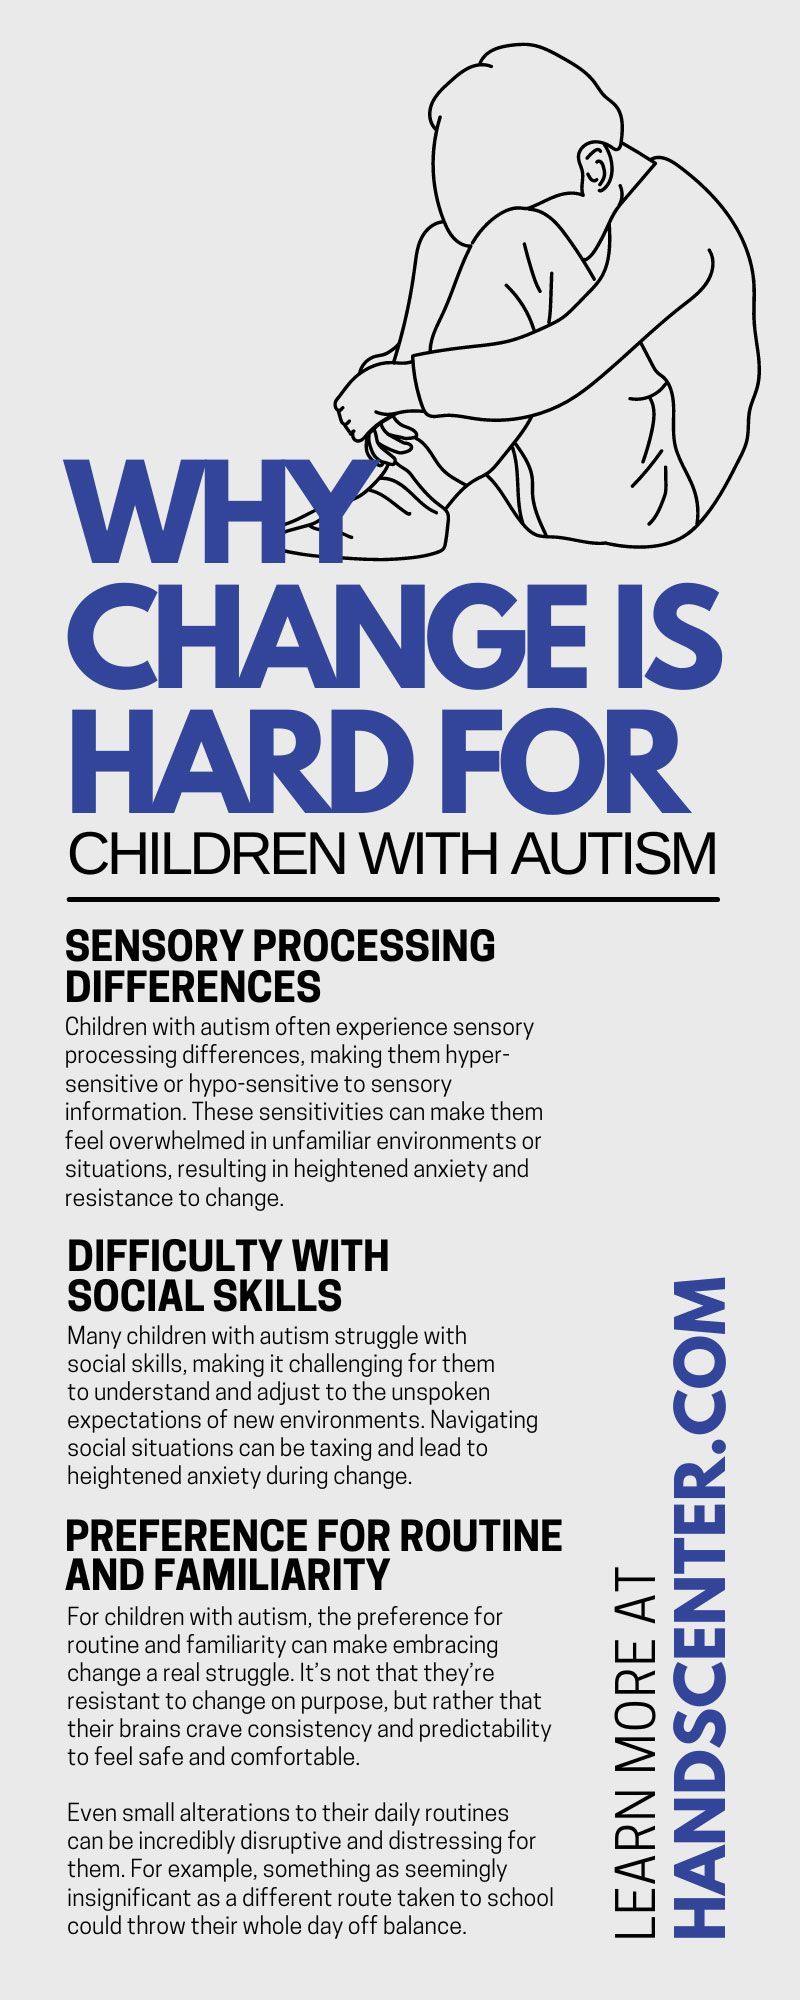 Why Change Is Hard for Children With Autism